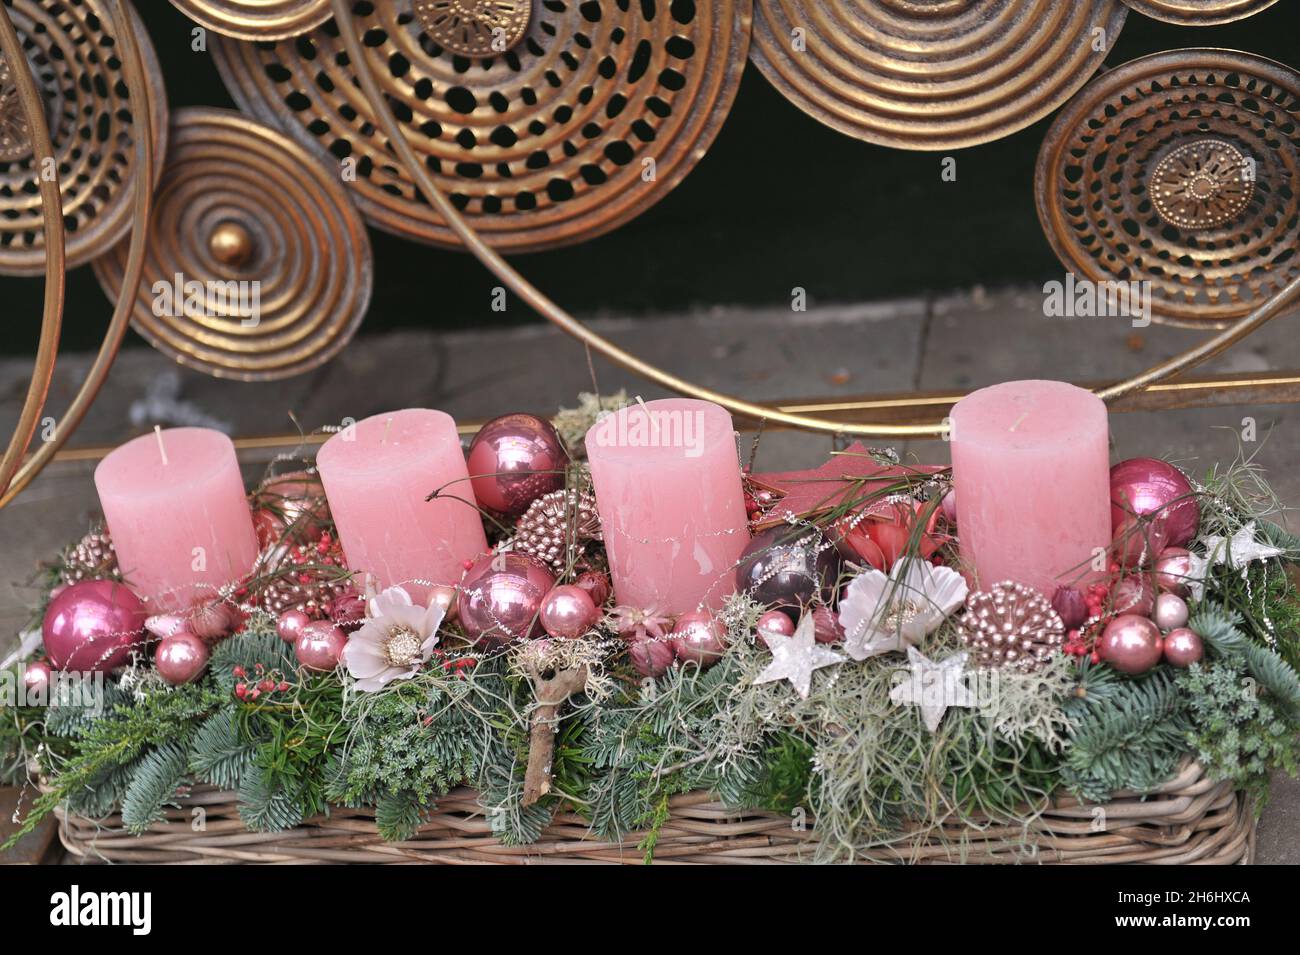 Pink Wreath High Resolution Stock Photography and Images - Alamy